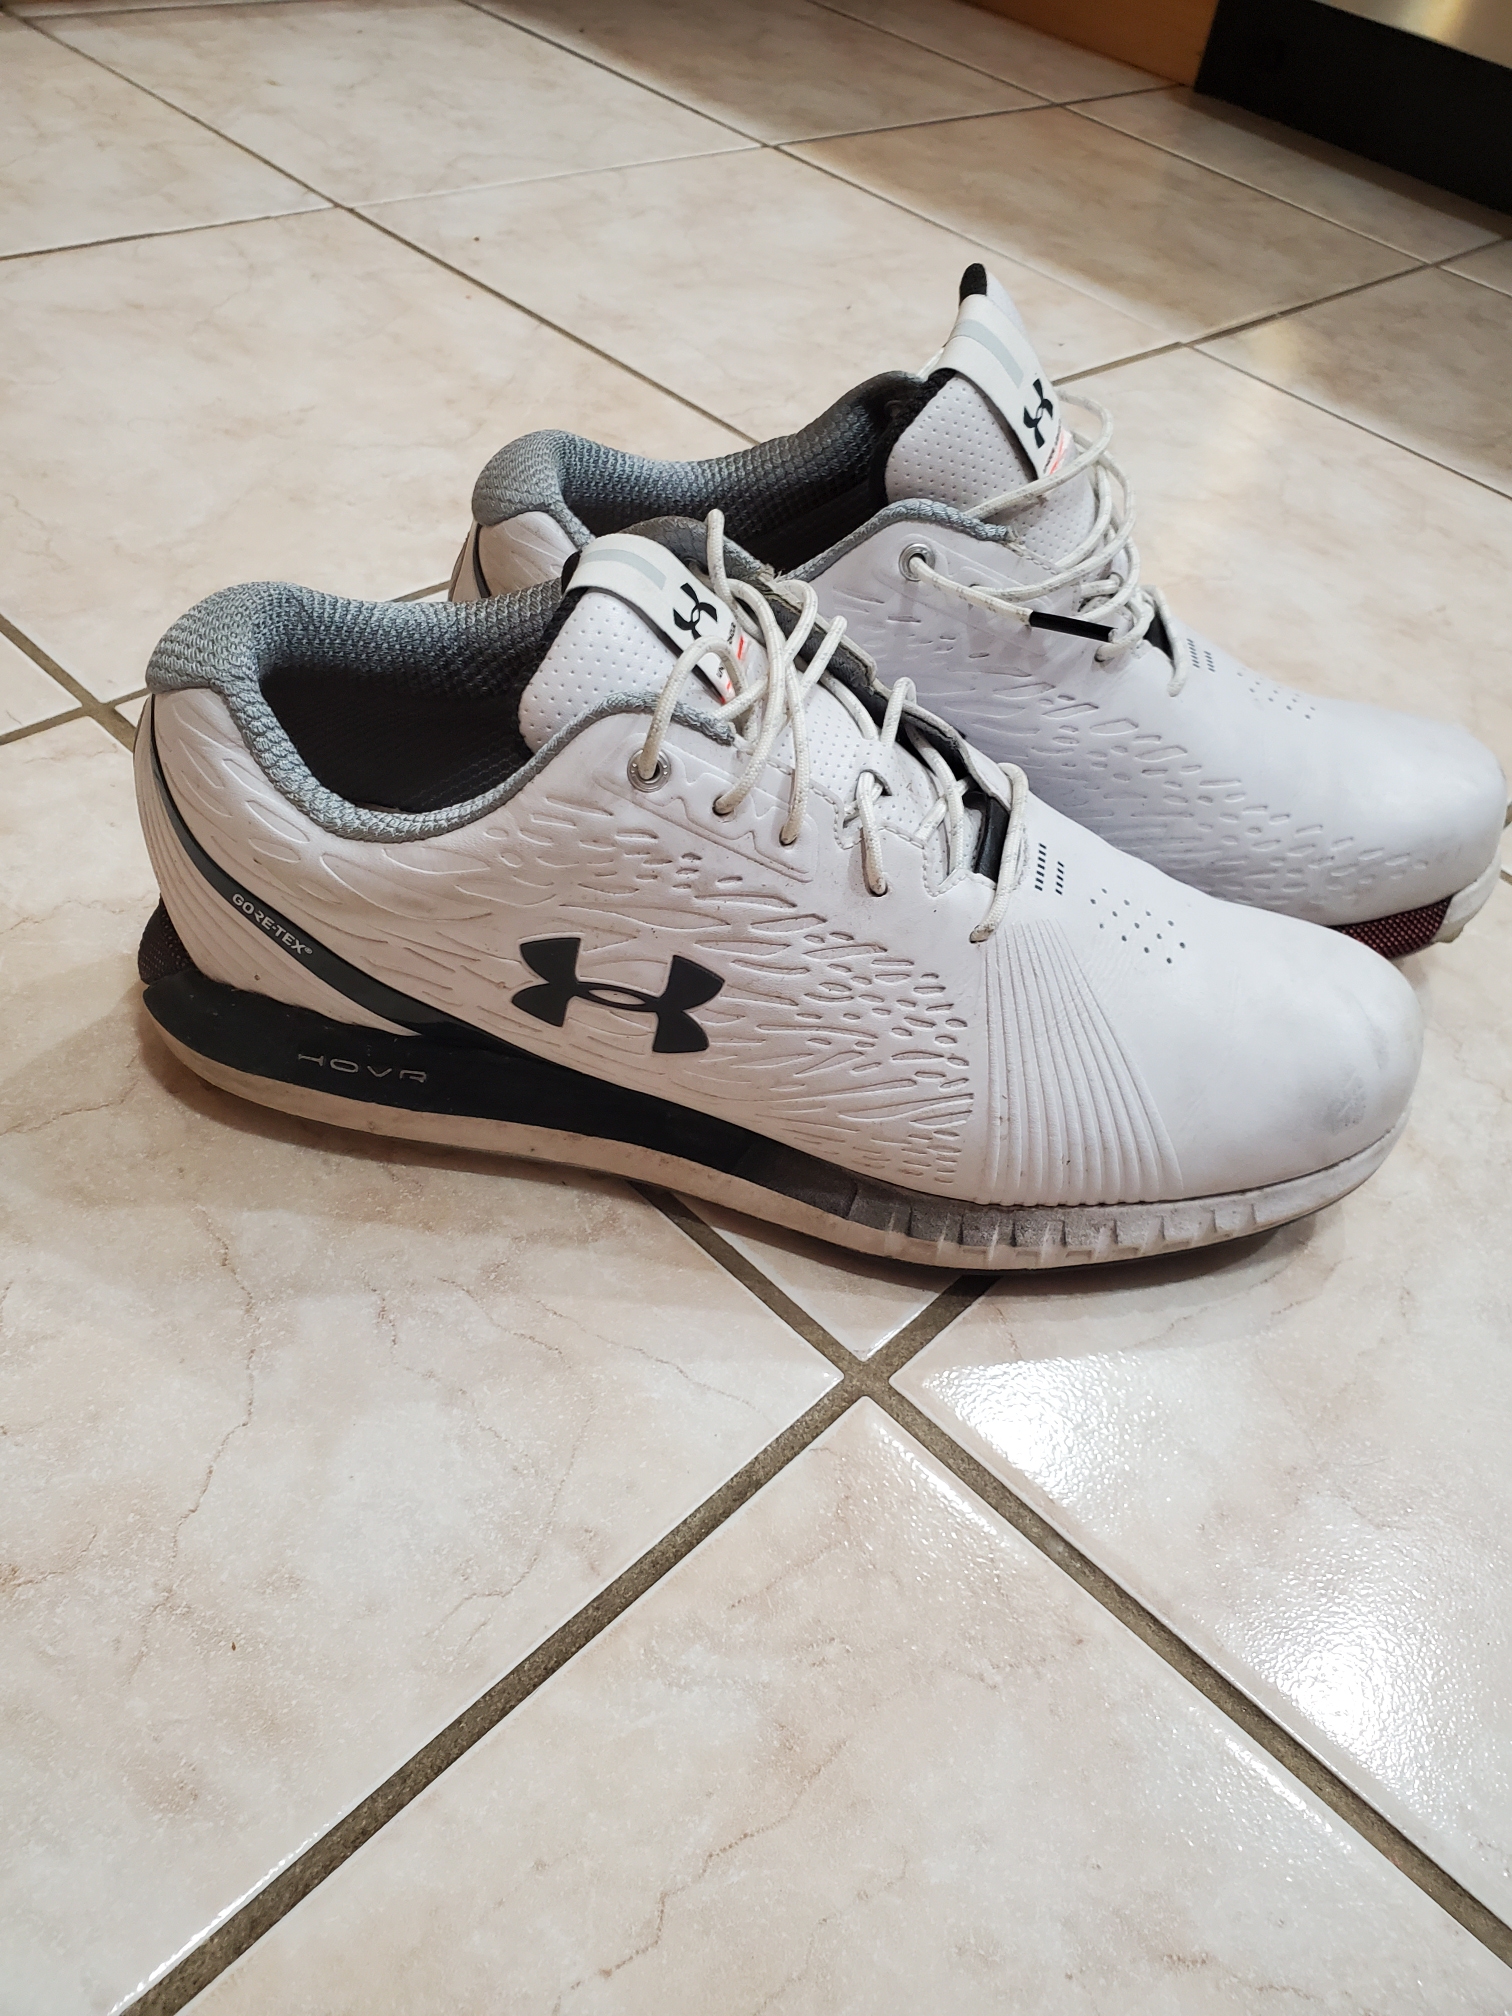 Used Men's Size 10 (Women's 11) Under Armour Golf Shoes